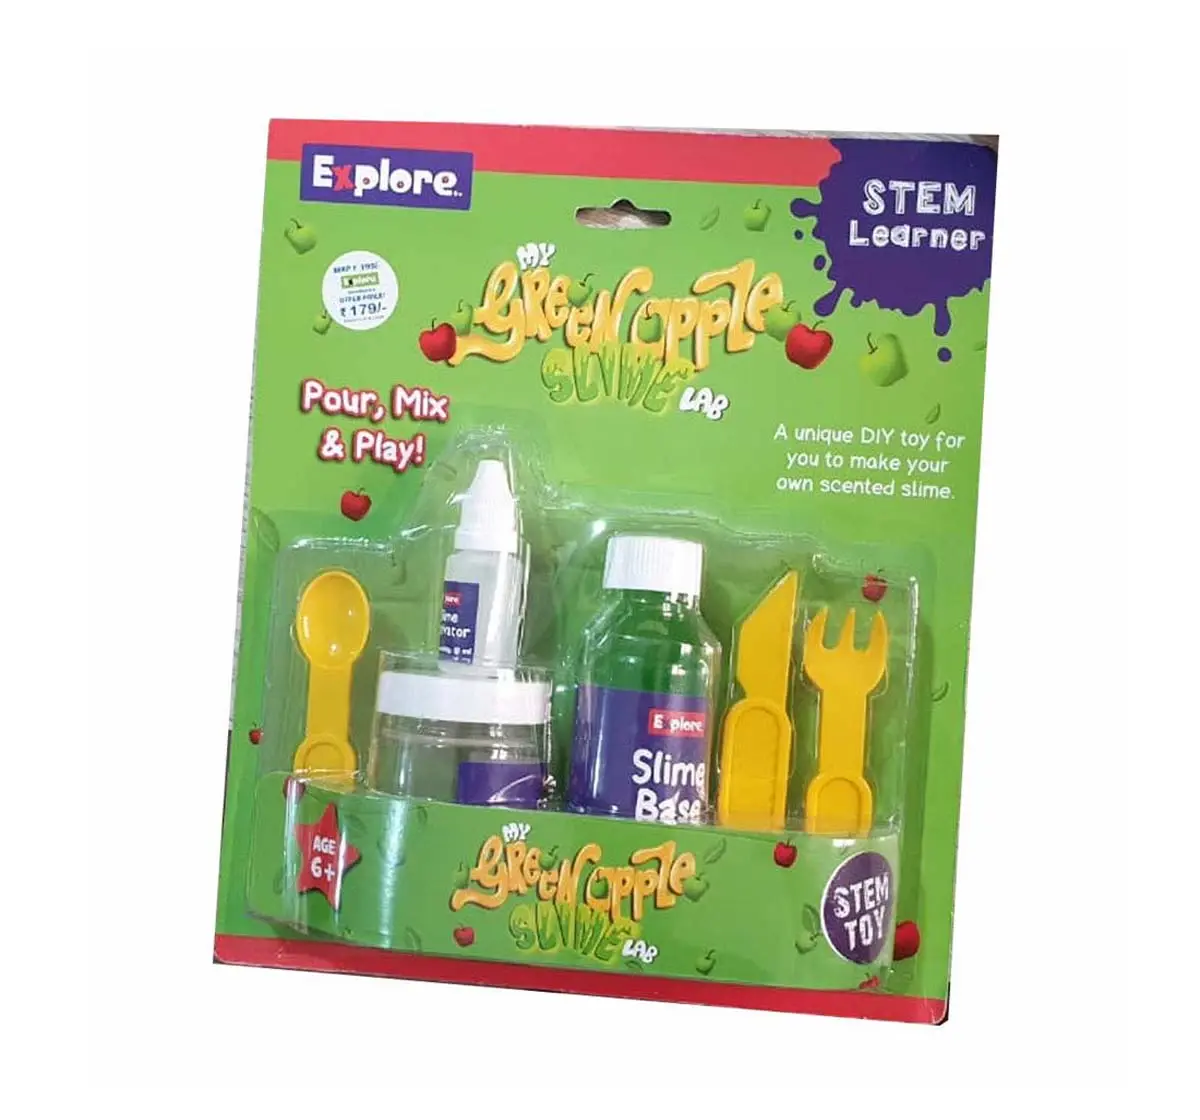 Play Craft My Green Apple Slime Lab Science Kits for Kids Age 6Y+